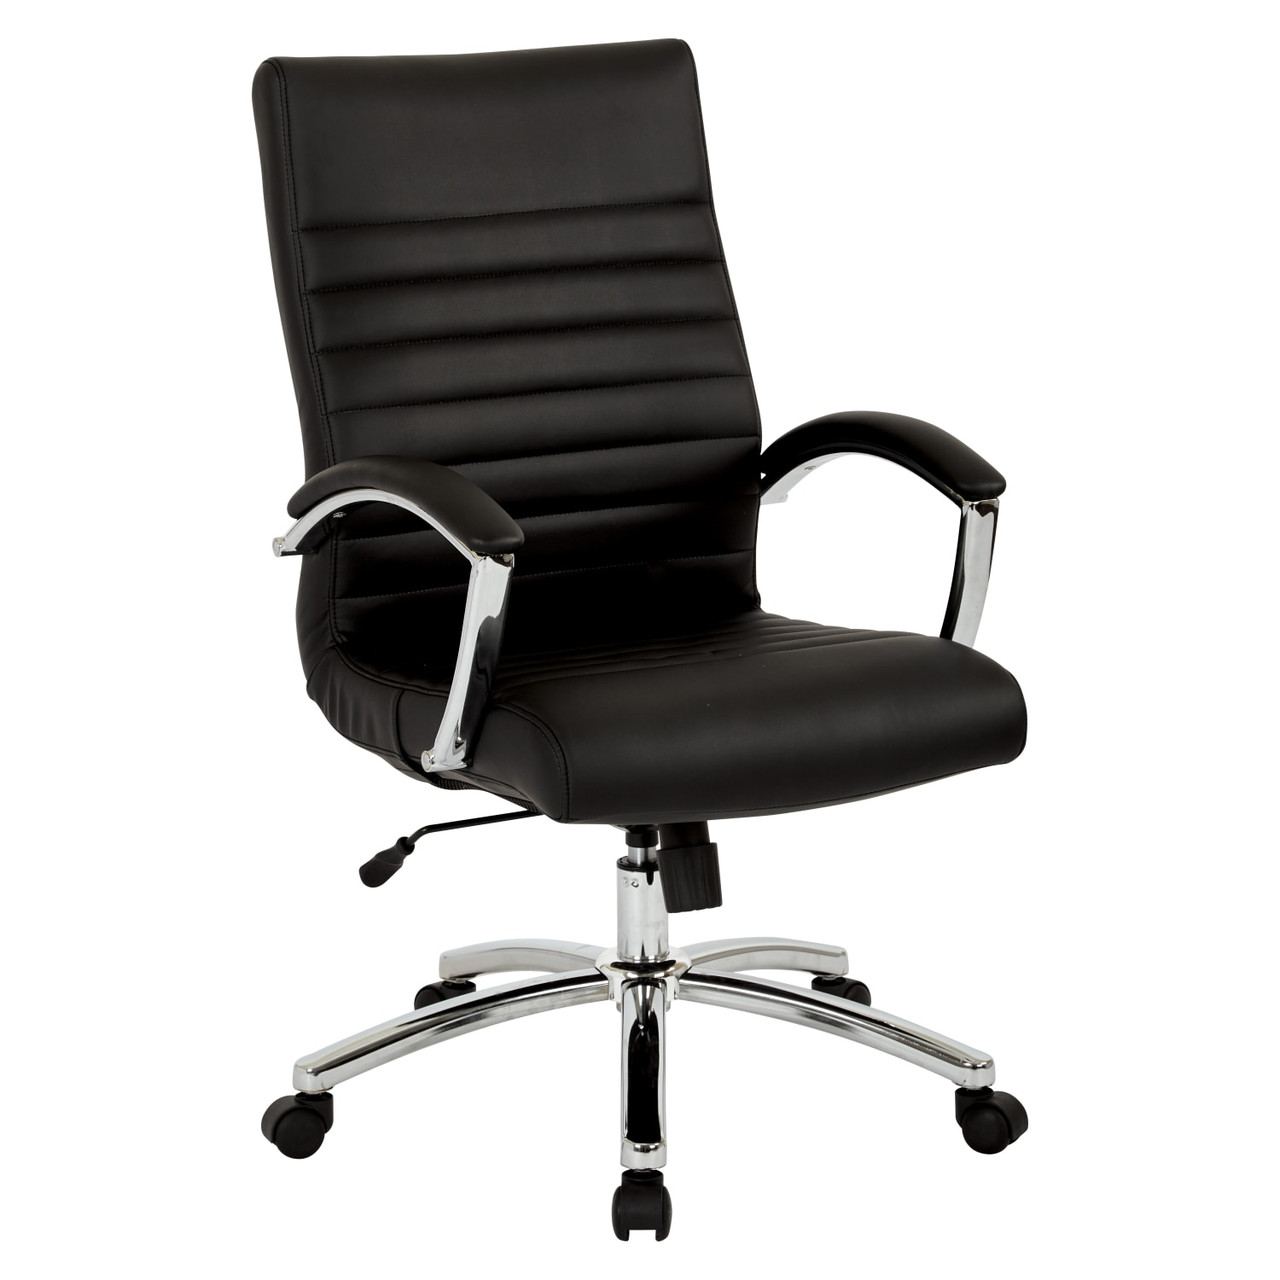 Executive Mid-Back Chair in Black Faux Leather - Chrome Finish Base